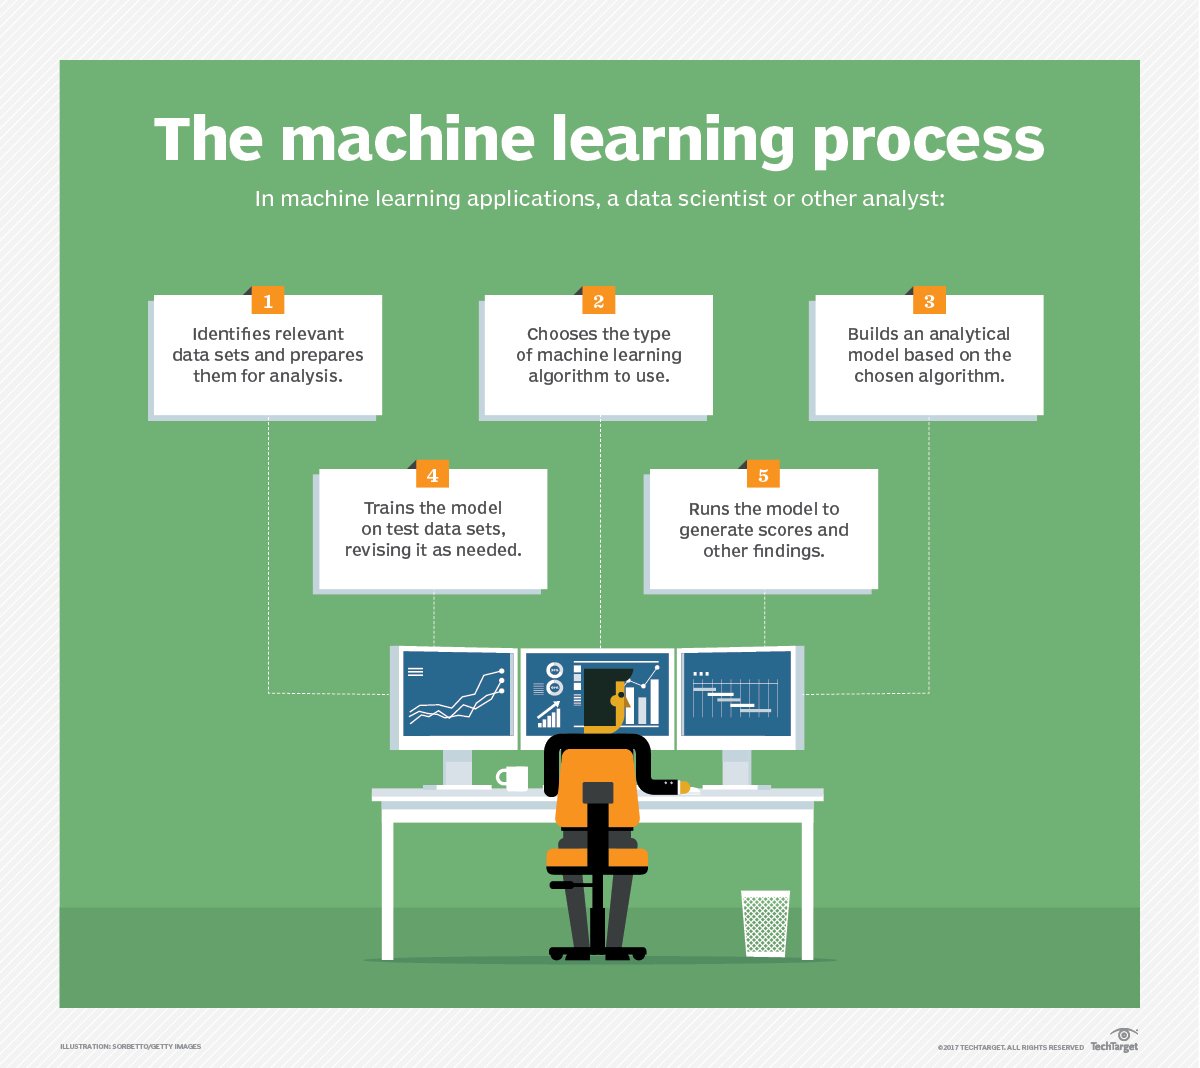 machine learning operations (MLOps)